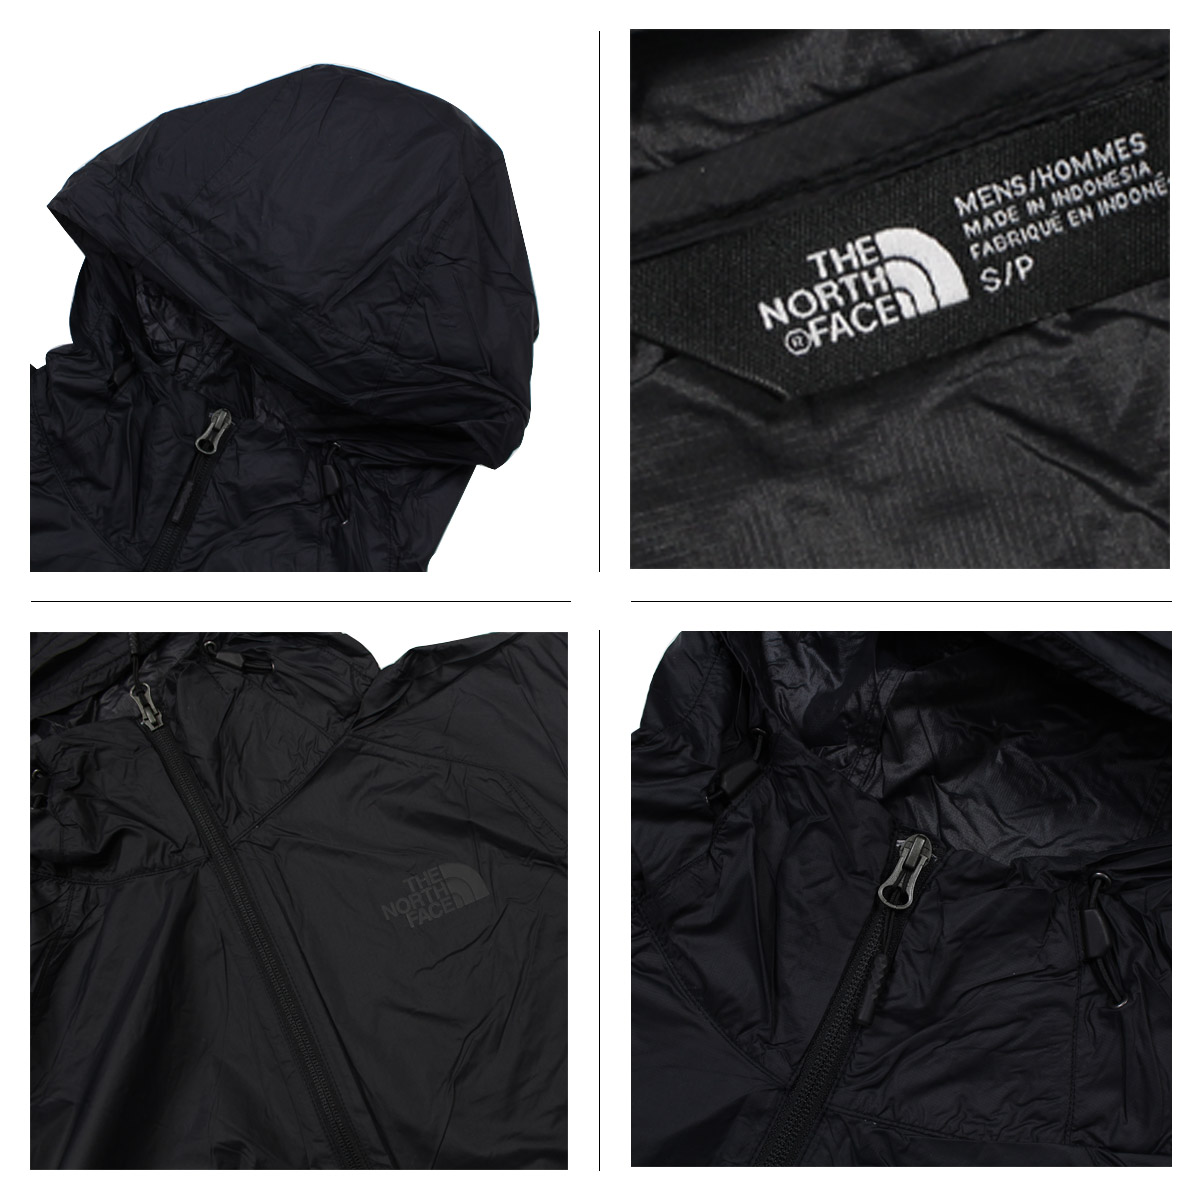 the north face jacket mens hommes